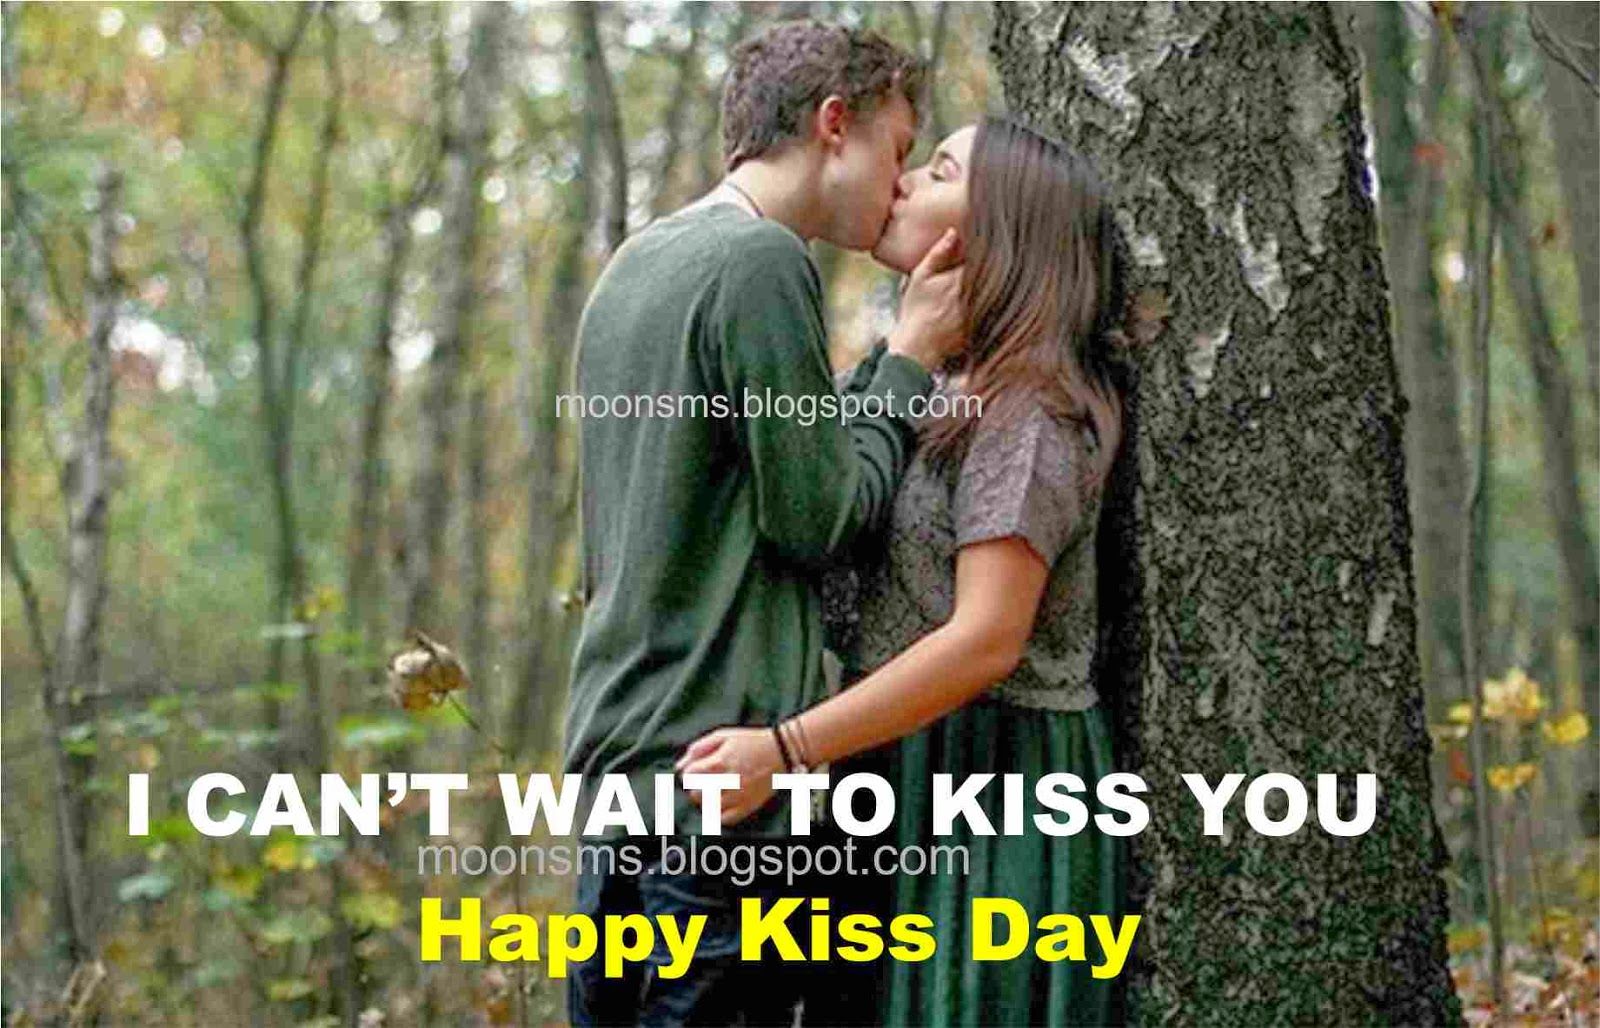 Happy kiss day Kiss sms text message wishes quotes jokes Greetings ...